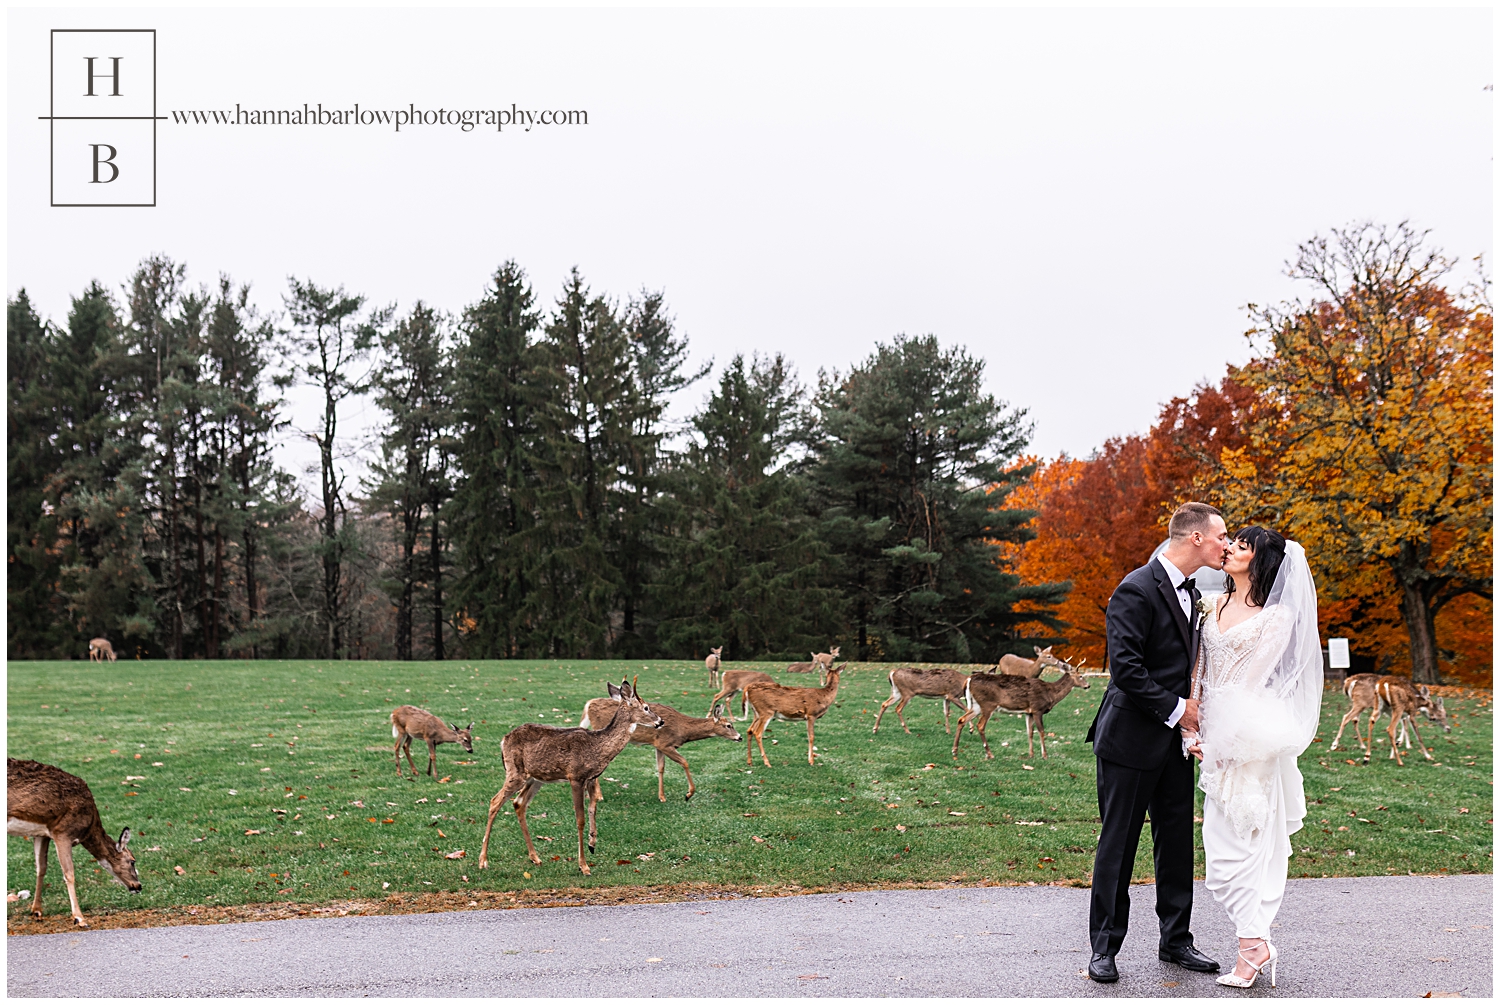 Bride and groom kiss with deer in field behind them